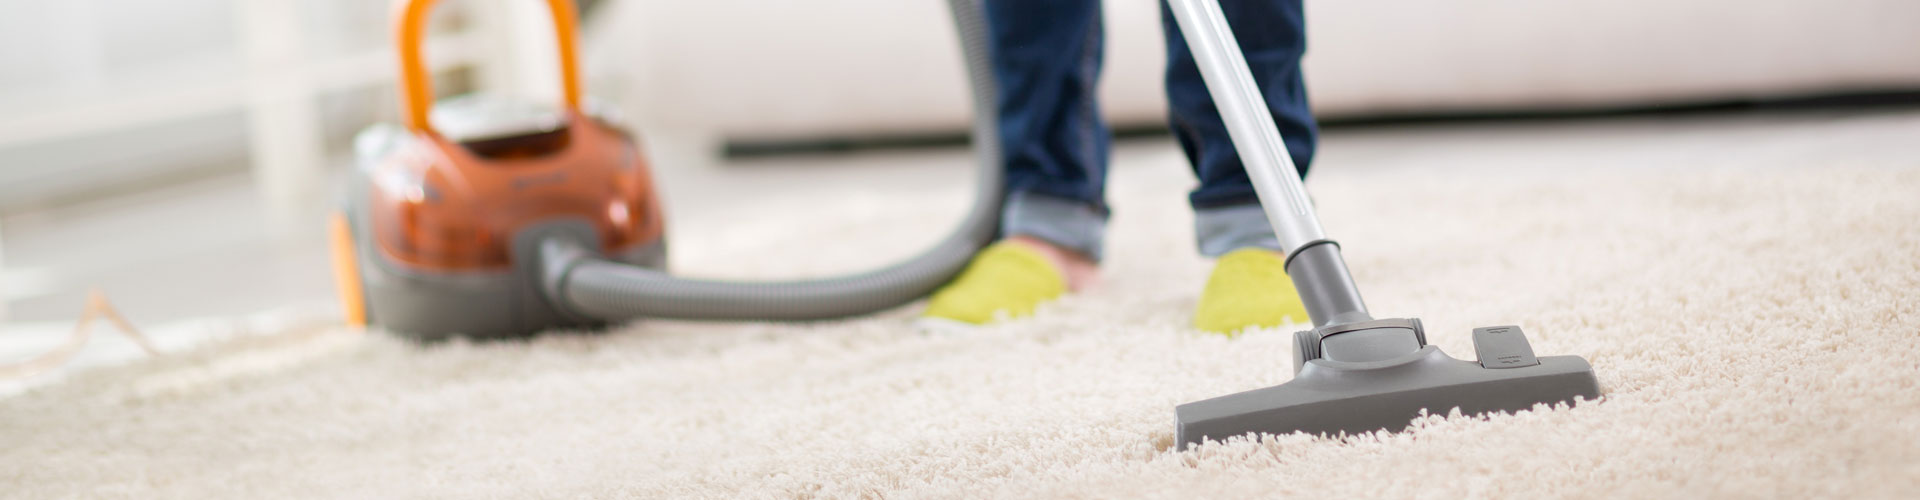 Worker Cleaning Carpet